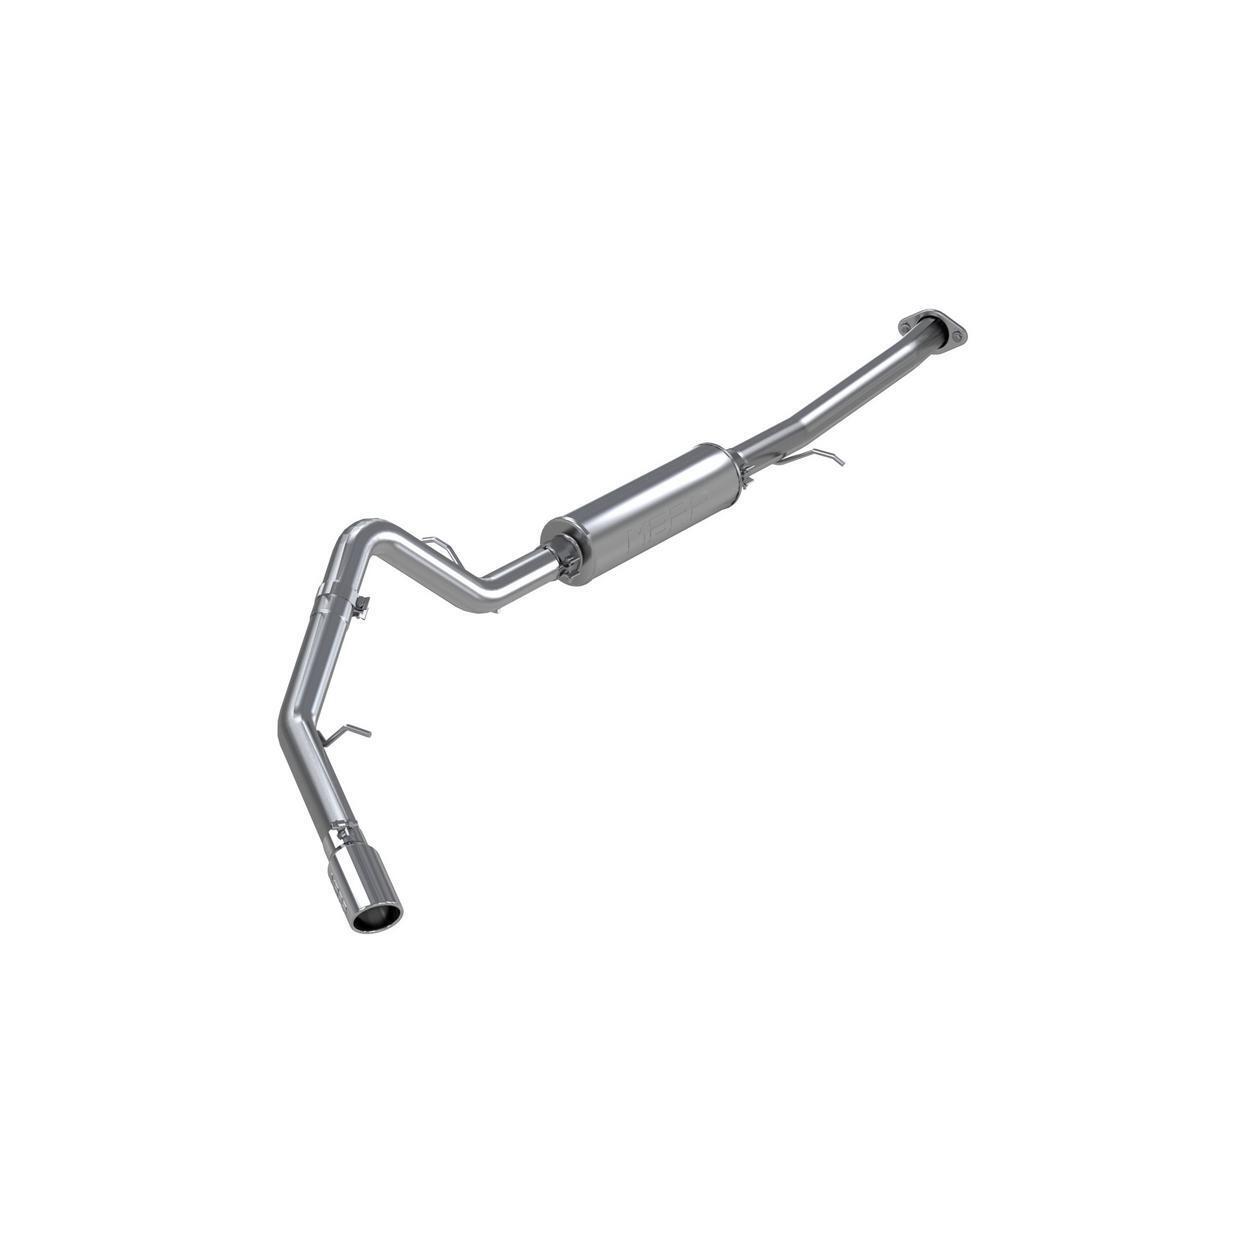 MBRP Exhaust System Kit for 2002-2005 Chevrolet Avalanche 1500